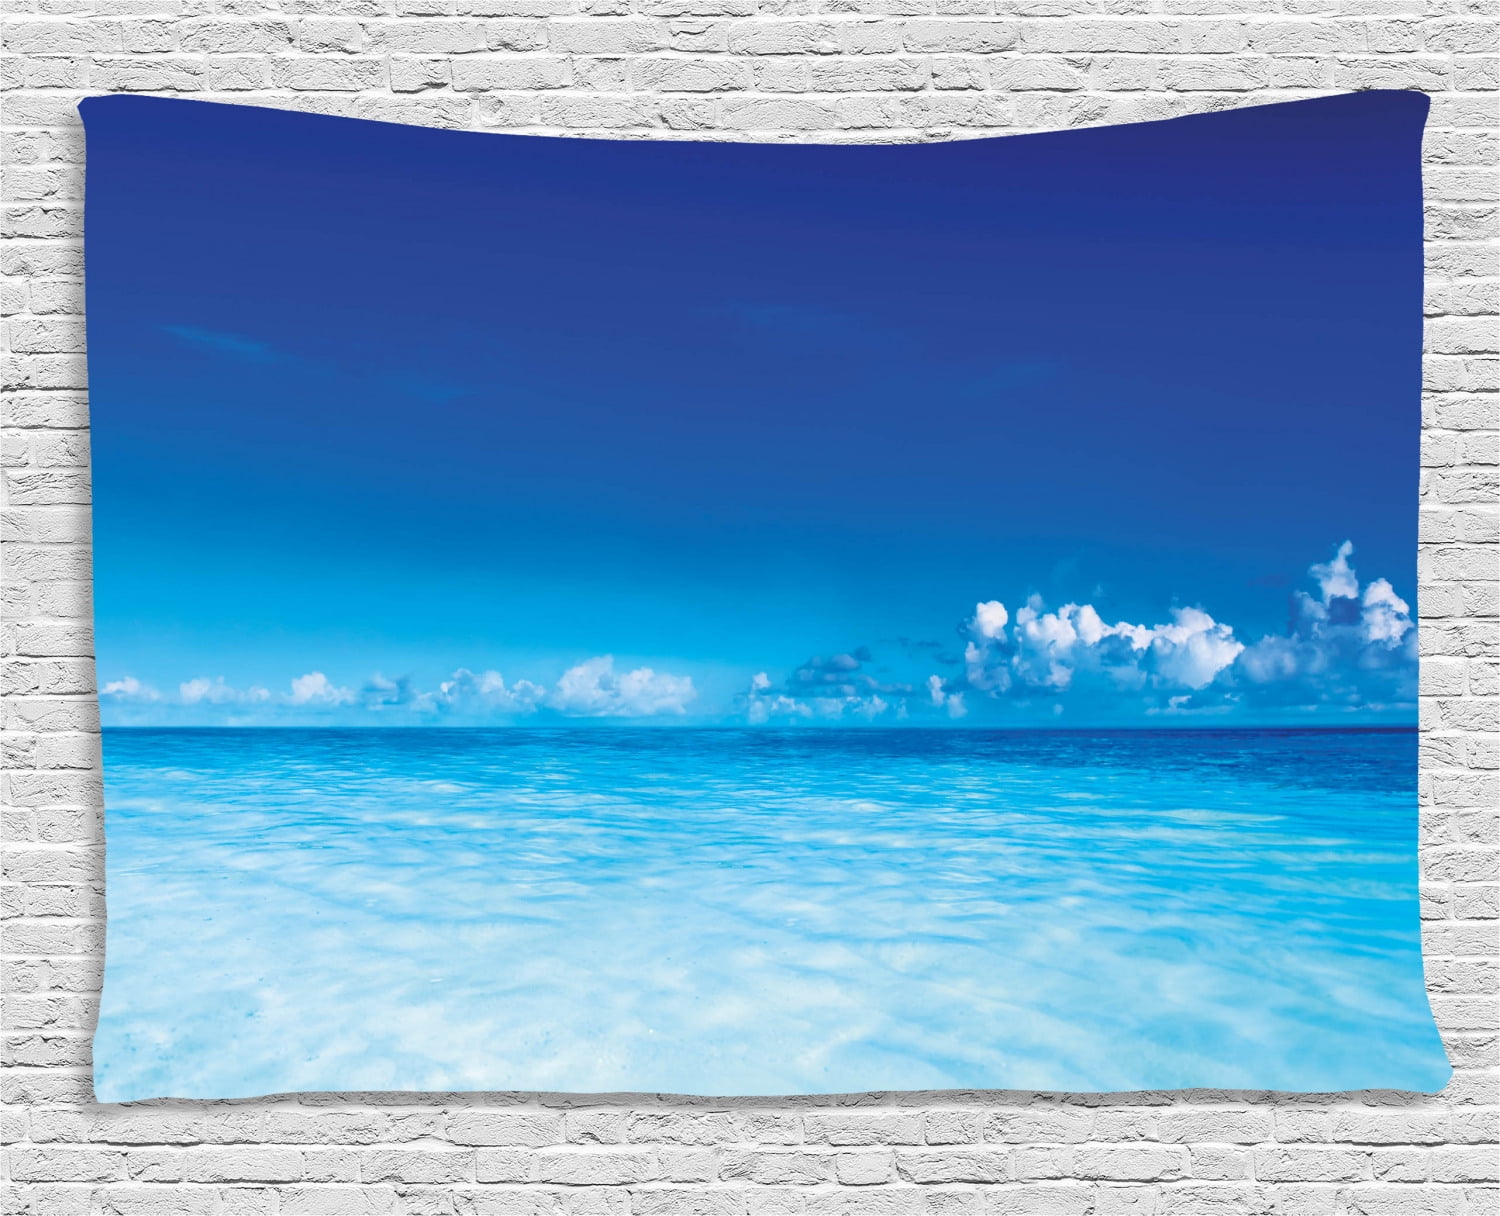 Landscape Tapestry Ocean Scenery Deep Sea Beach Hot Summer Themed Photo Wall Hanging For Bedroom Living Room Dorm Decor 80w X 60l Inches Turquoise